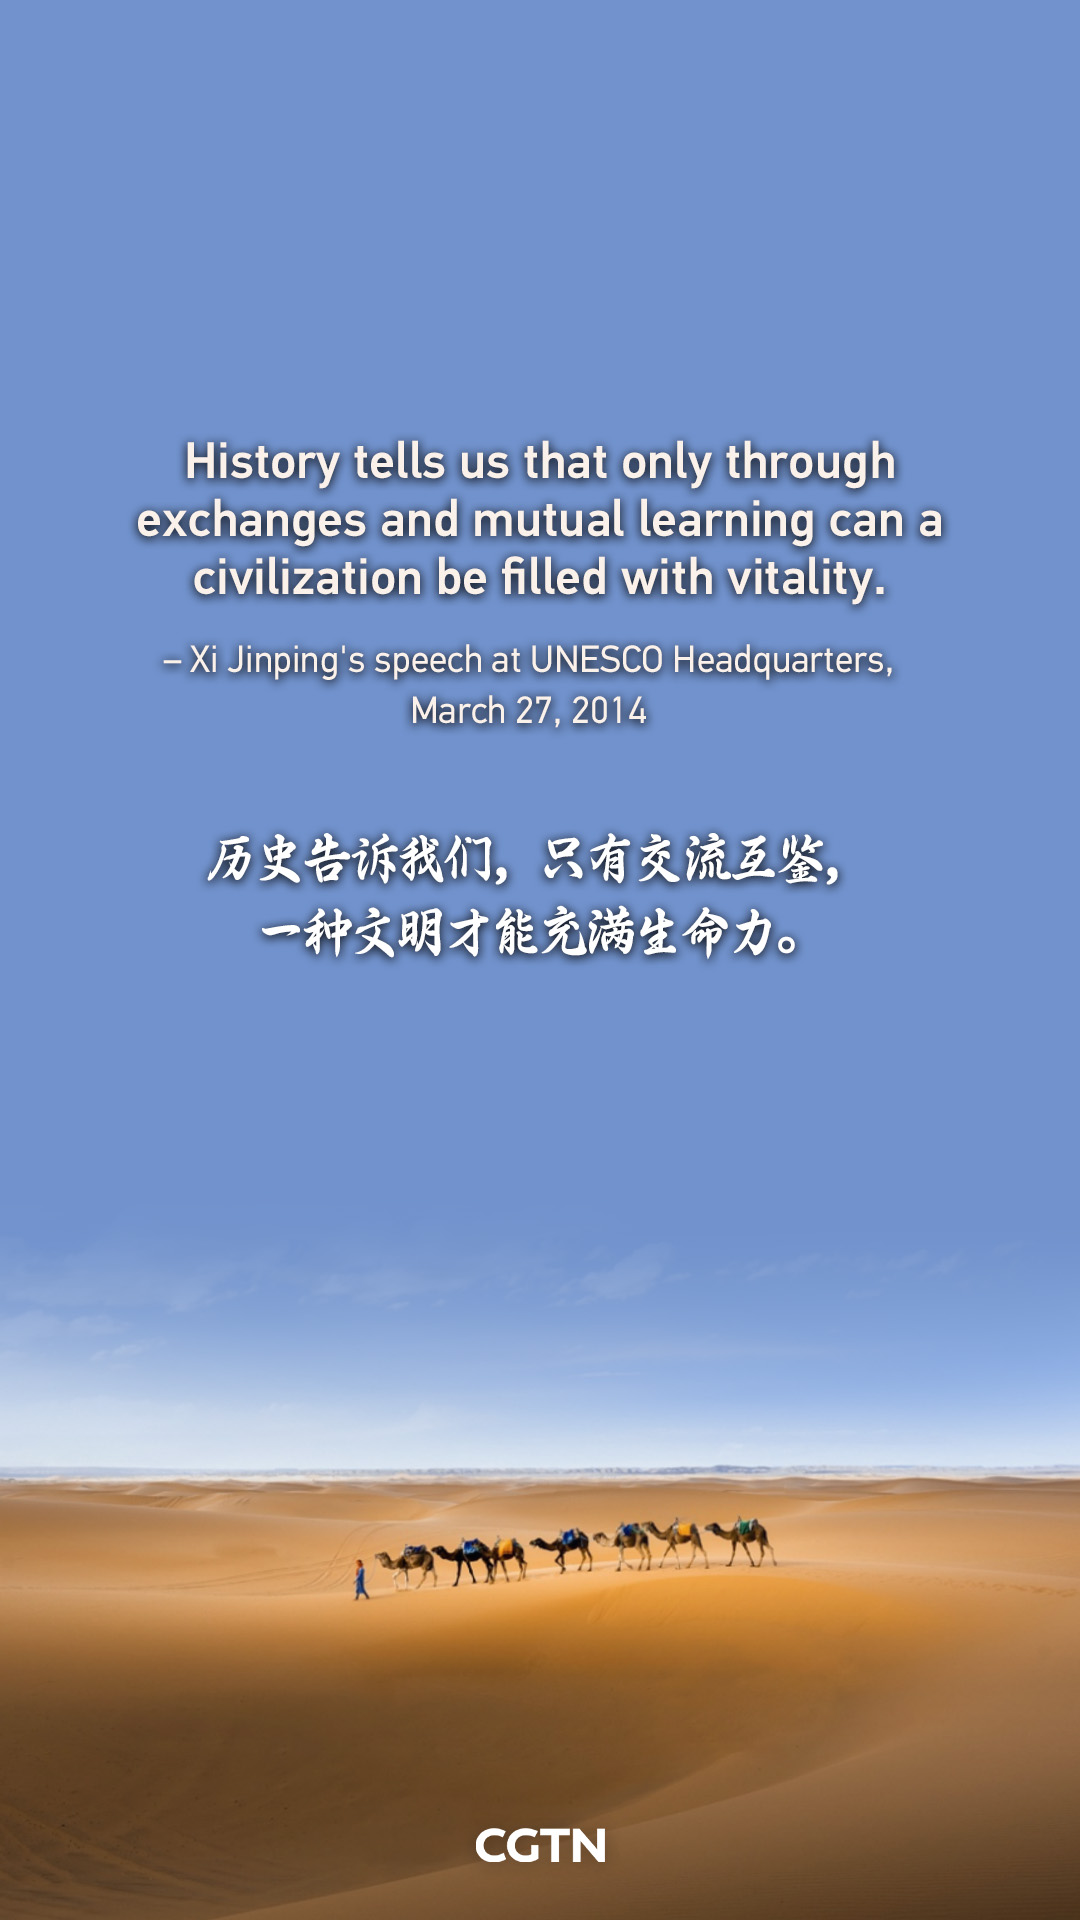 Xi Jinping's key quotes on exchanges and mutual learning among civilizations